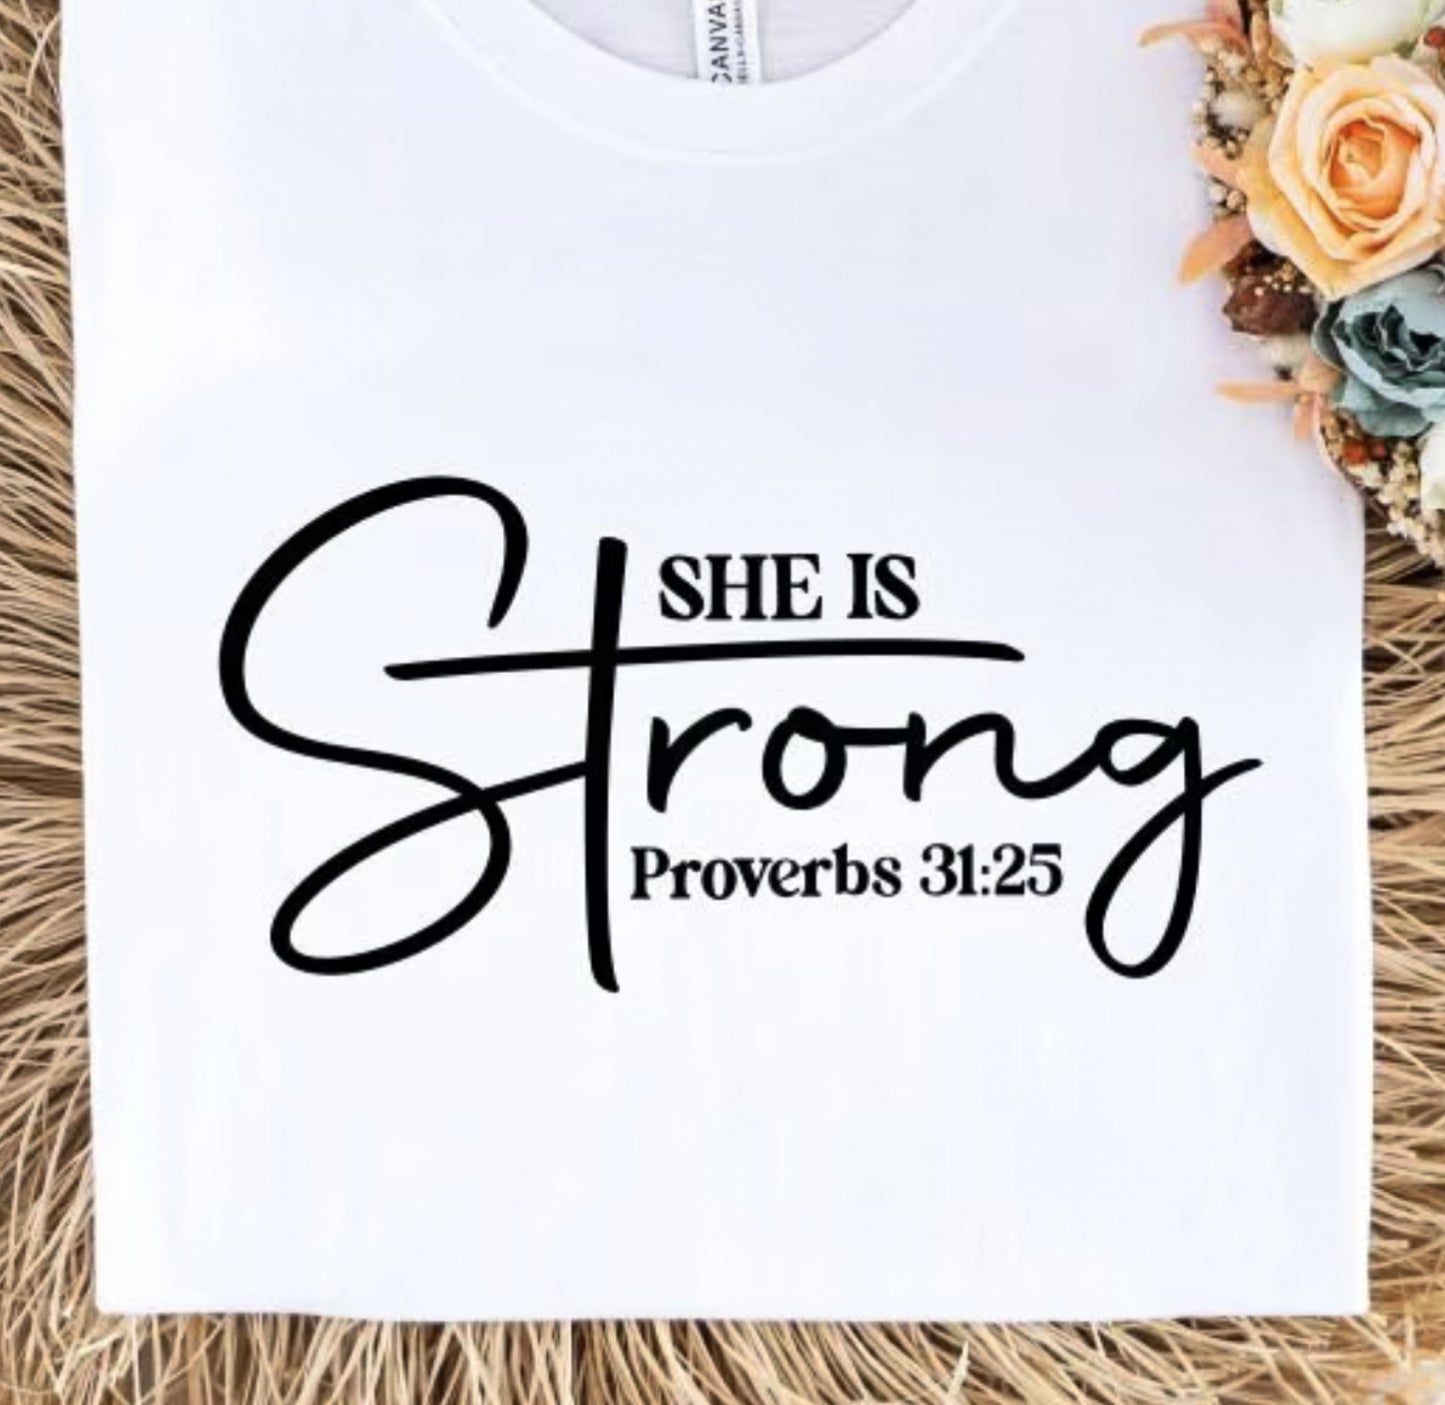 She Is Strong Proverbs 31:25 Tee